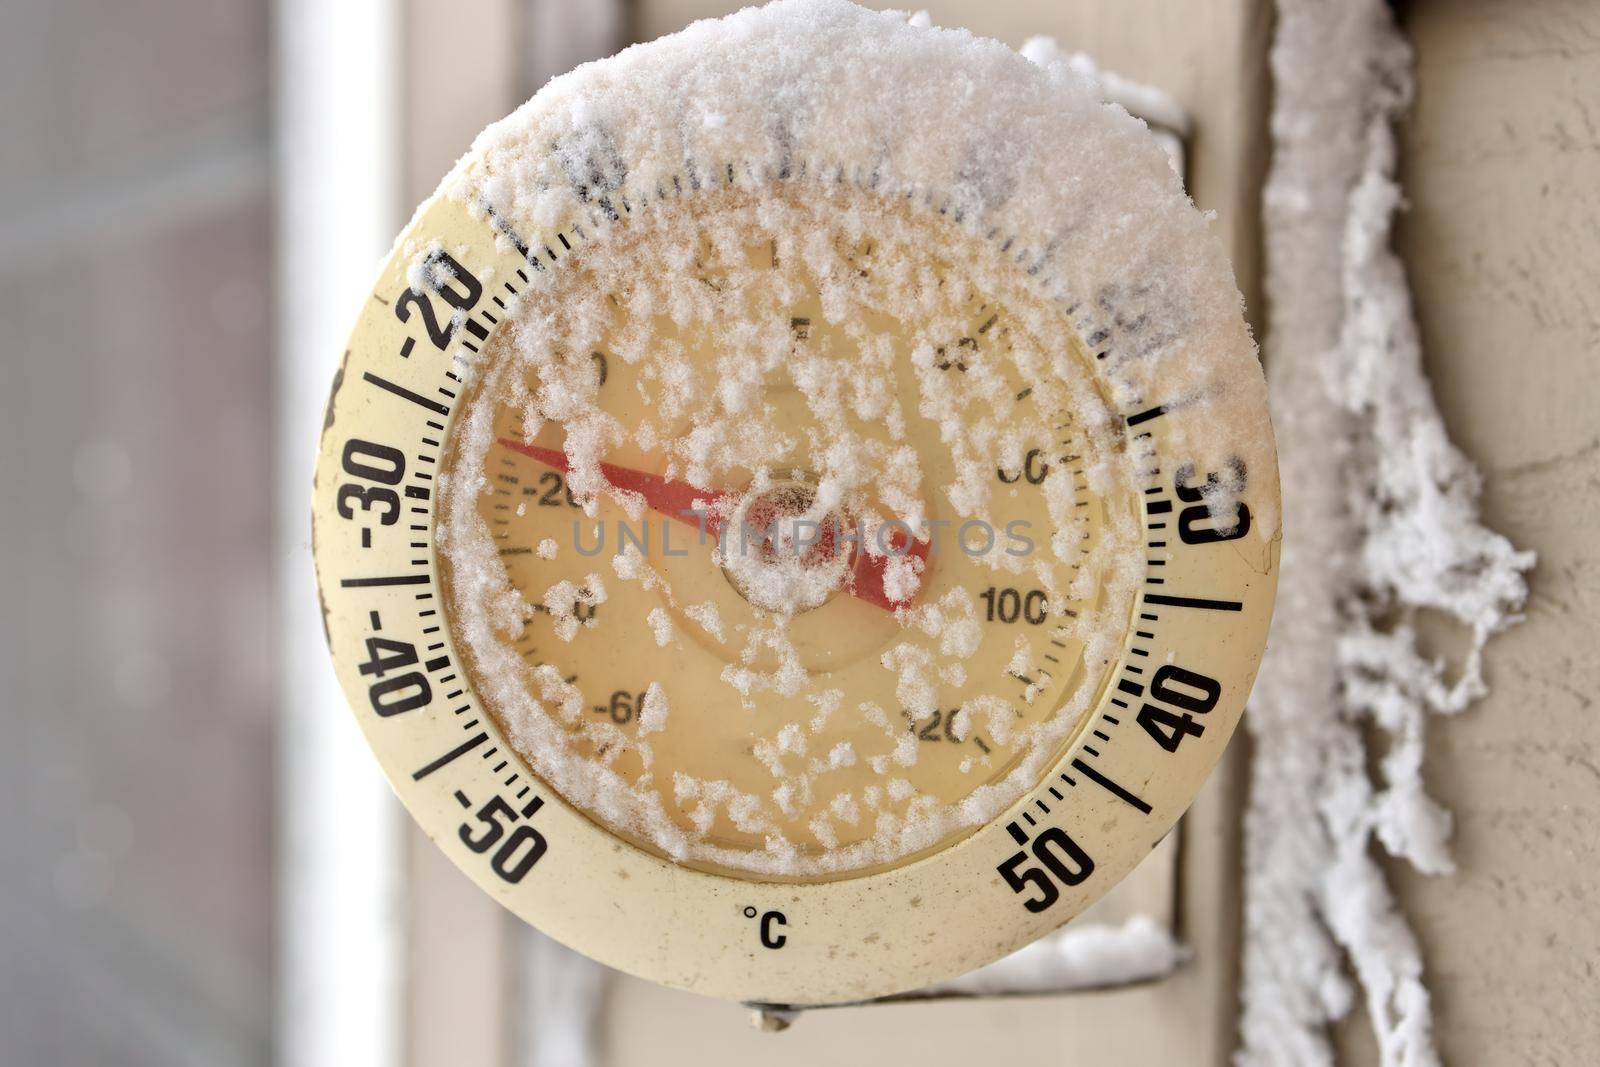 Close up of a Frosty snow-capped outdoor Thermometer on a frigid cold winter day. Temperature reads minus 26 degrees Celsius or minus 16 Fahrenheit